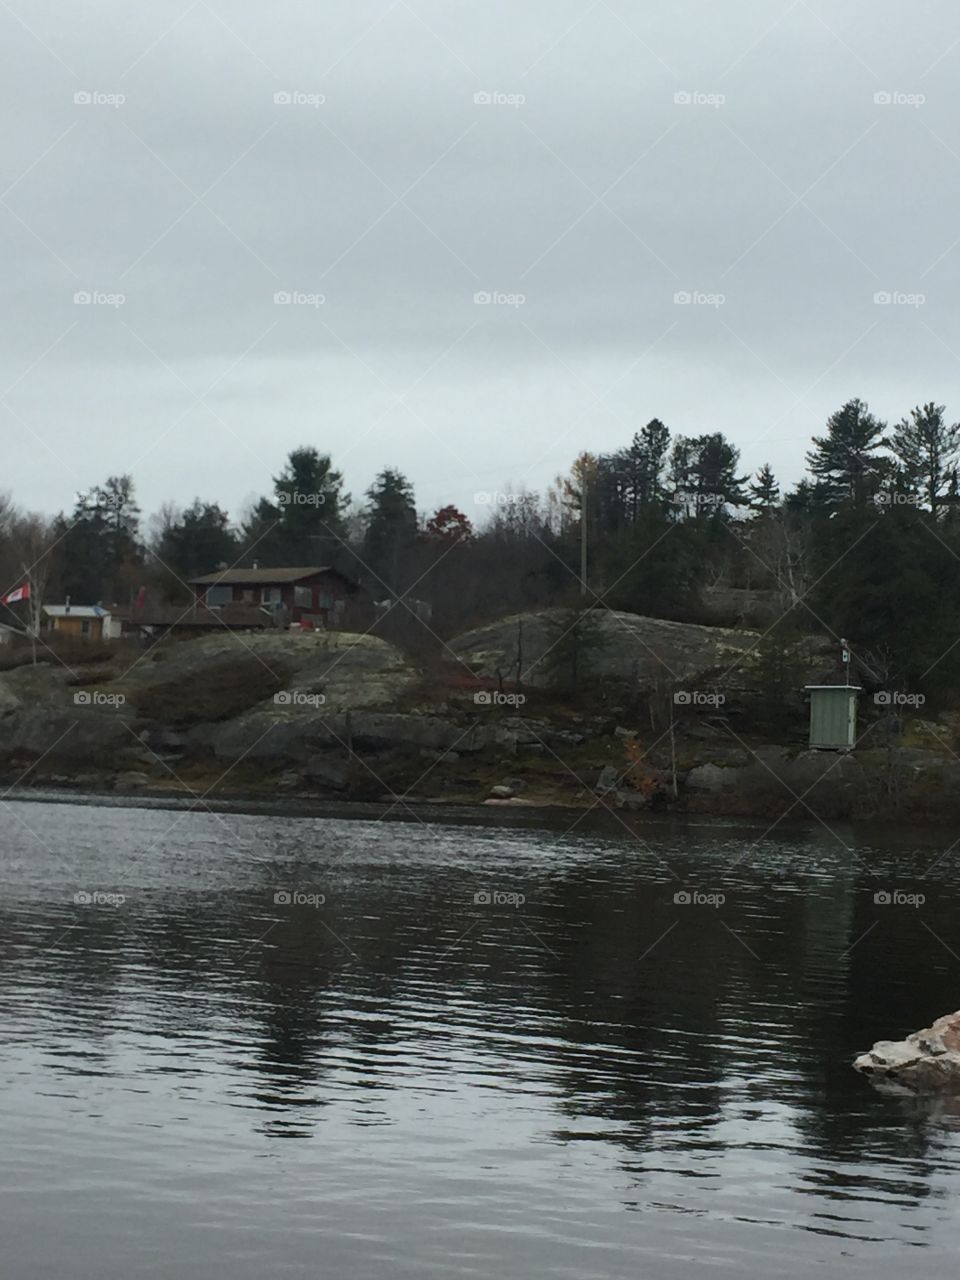 A nice view from across the lake to the cottage perched high on a rock northern Ontario